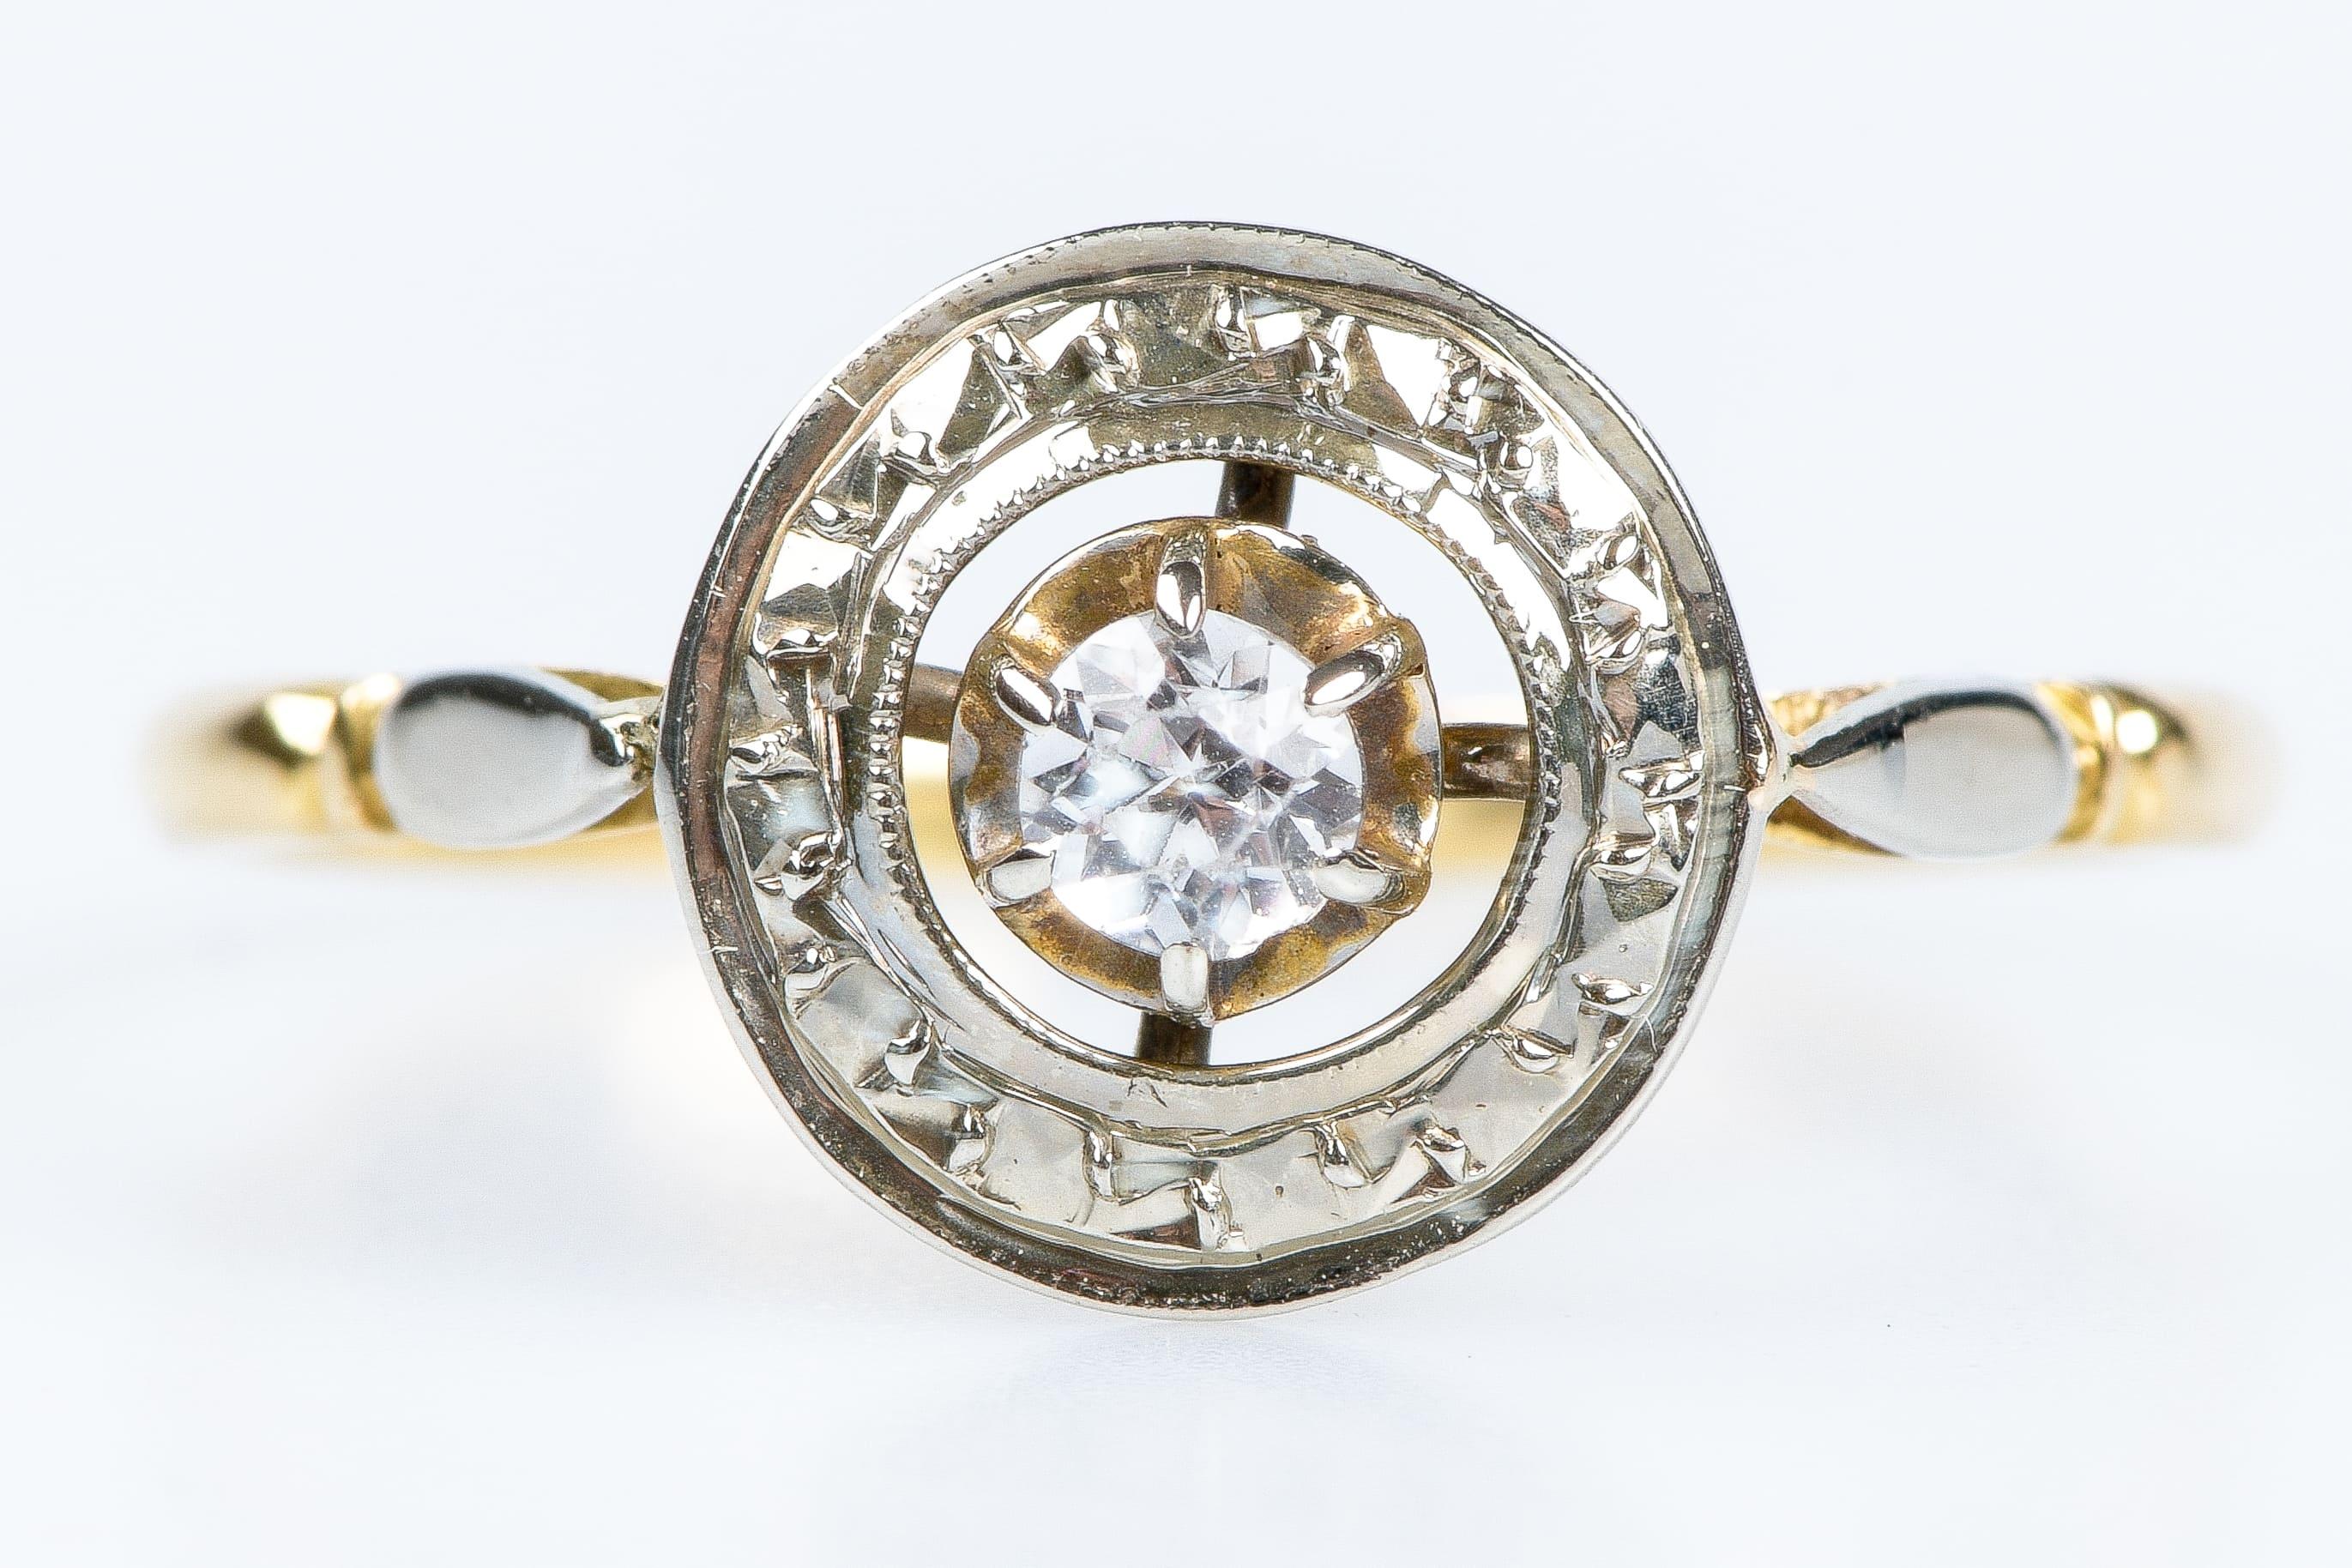 Antique 18-carat yellow gold ring decorated with zirconium oxide.
The oxide is mounted in the center of the jewel, in a circle decorated with reliefs. Several details make this ring unique. This jewel is very elegant and vintage, suitable for any